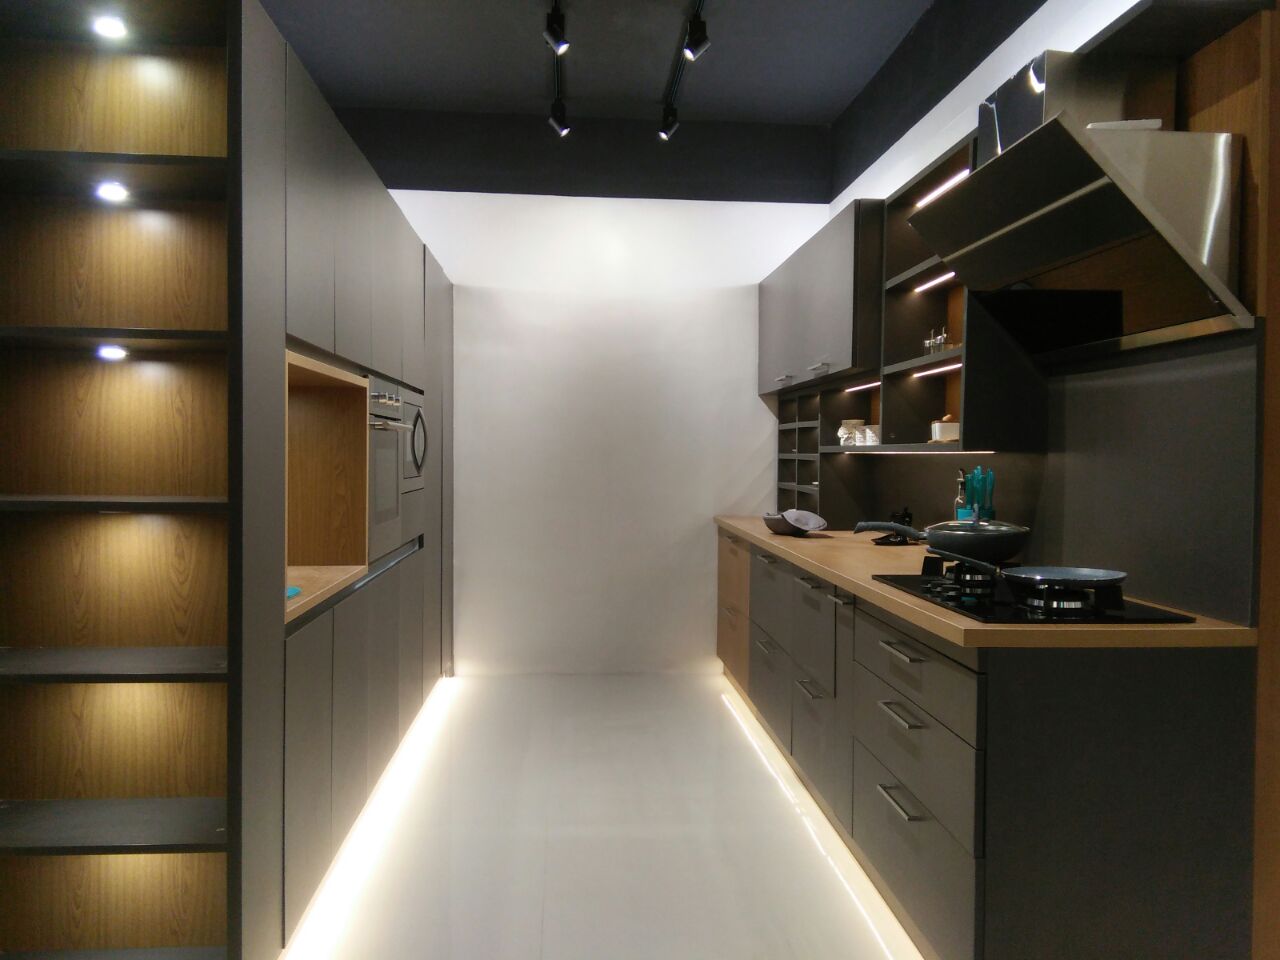 designer-wardrobes-in-noida-greater-noida-largest-dealers-and-manufacturers-in-noida-and-greater-noida-india